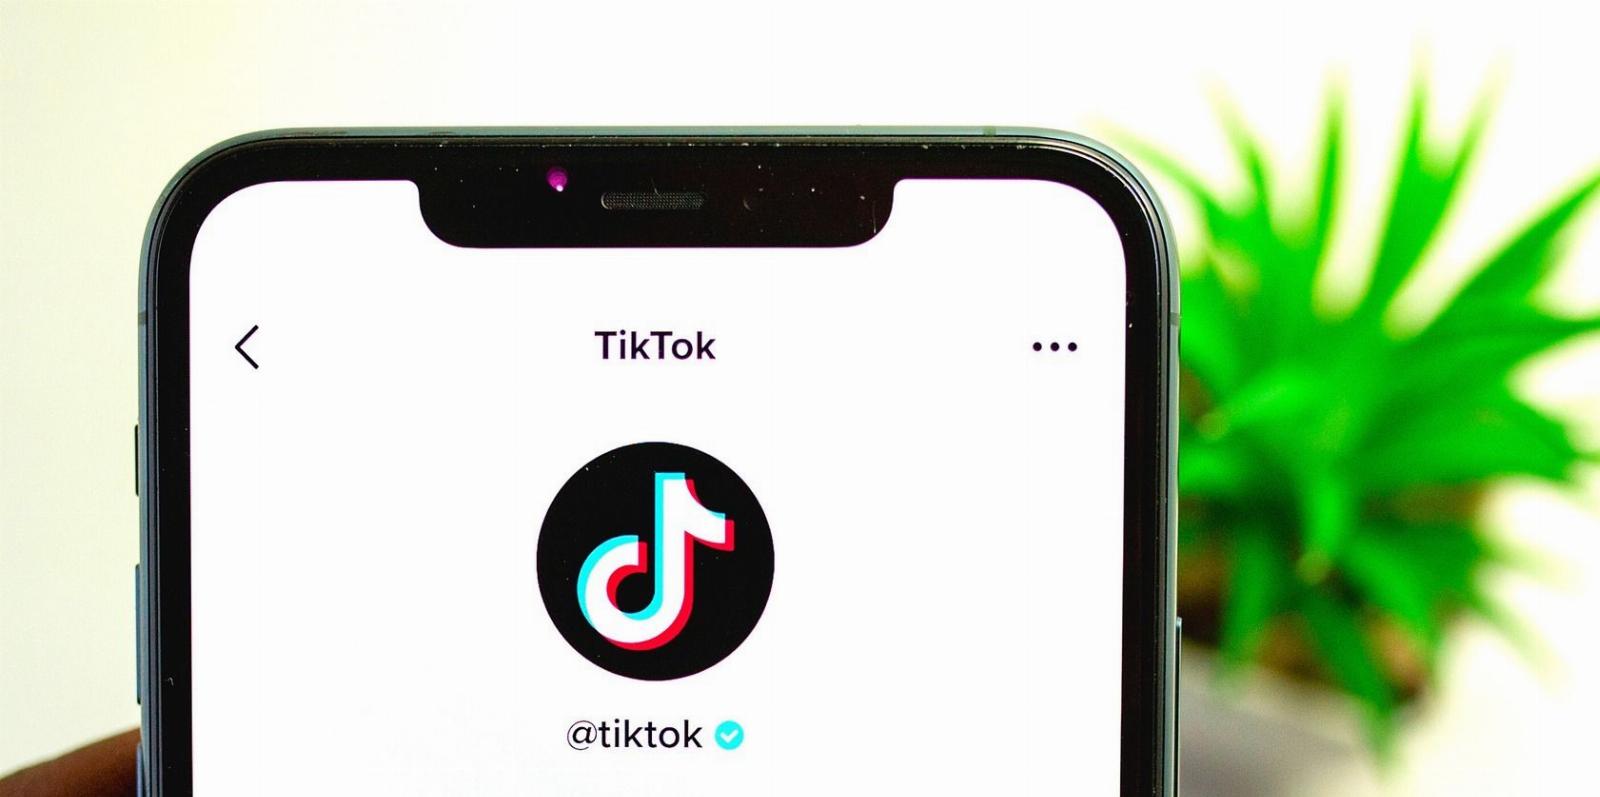 Why You Can’t Put a Link in Your TikTok Bio